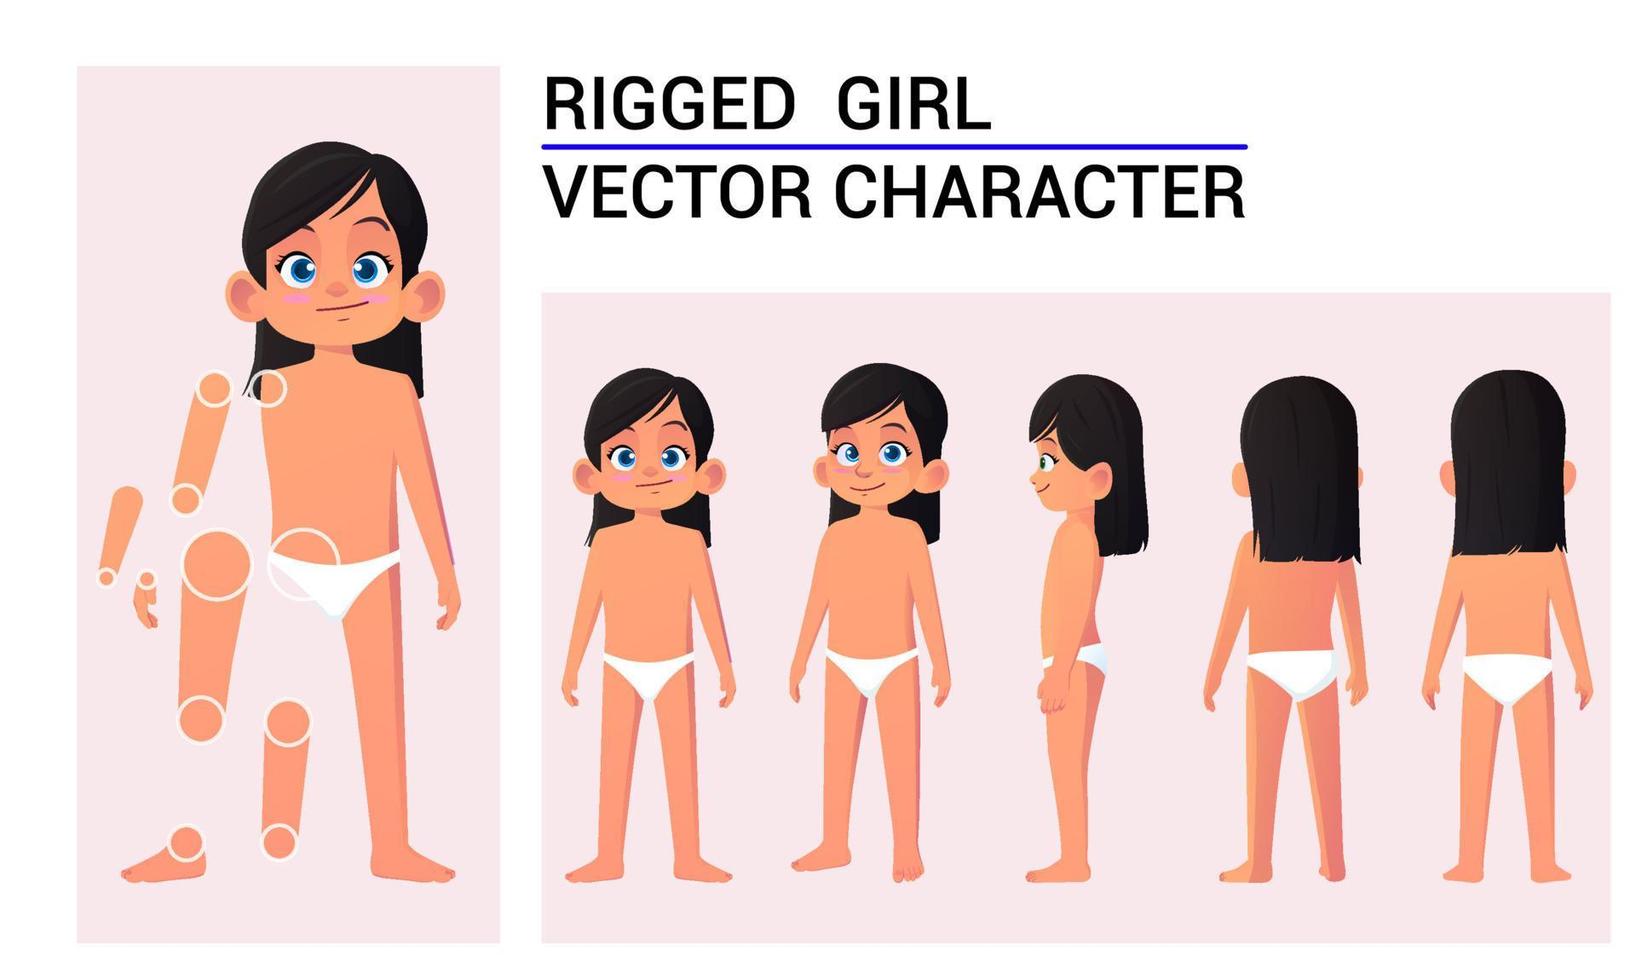 Child Character Creation Set For Animation, Girl Wearing Underwear with Black Hair Poses vector